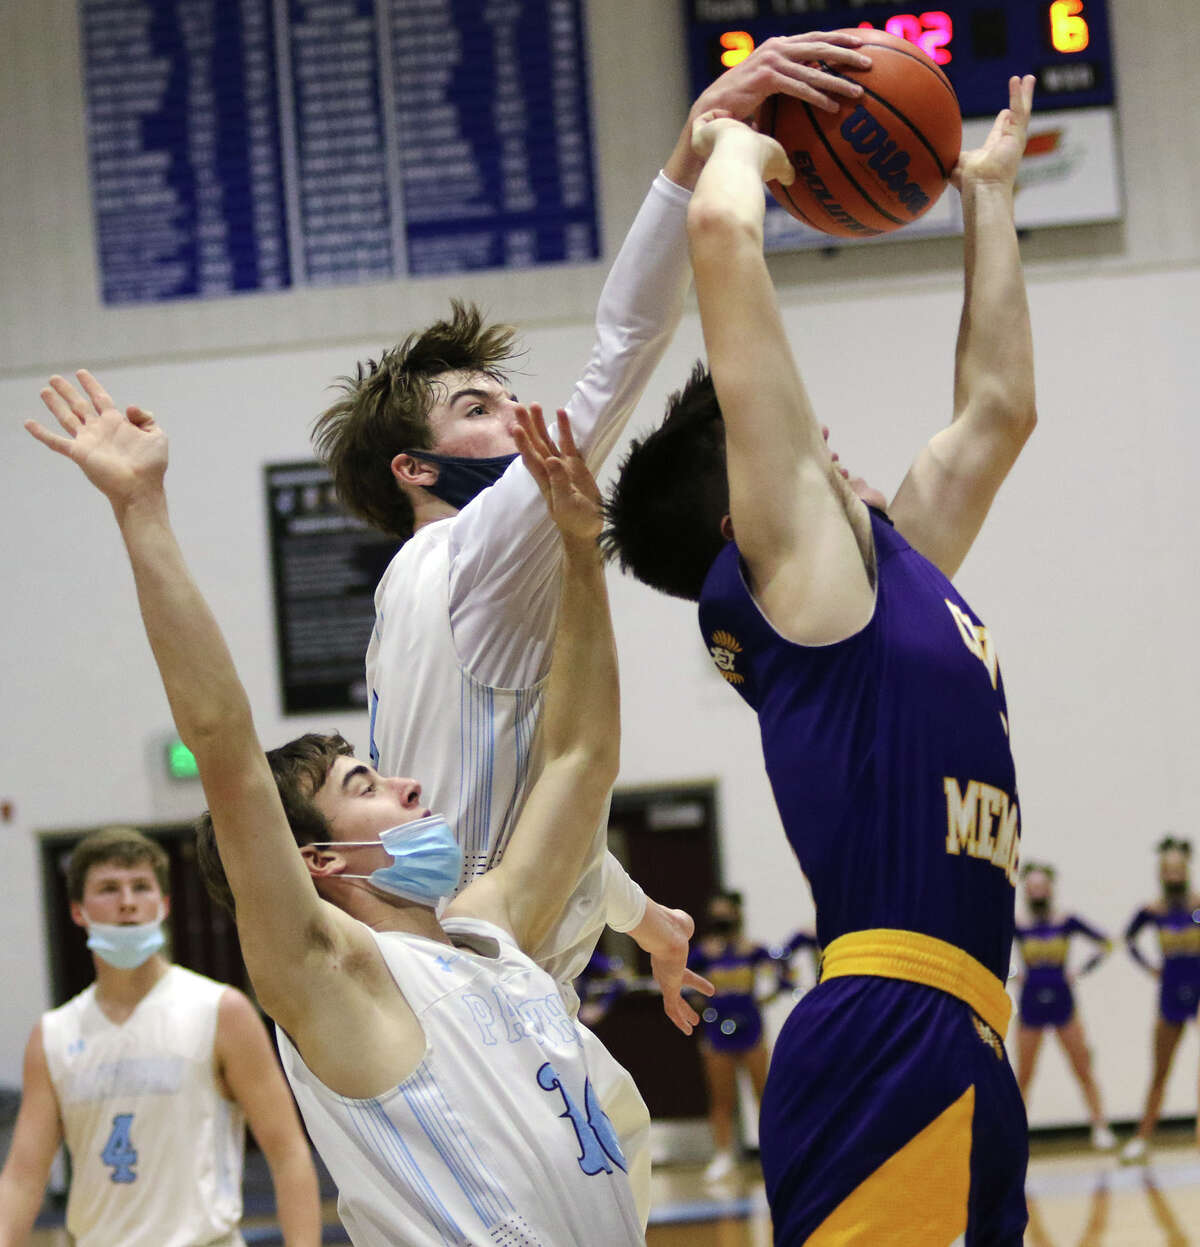 Jersey's Jaxon Brunaugh goes up to block a shot by CM's Manny Silva (right) while the Panthers' Trenton Decker (11) avoids contact in the first half of Friday's MVC boys basketball game at Havens Gym in Jerseyville.